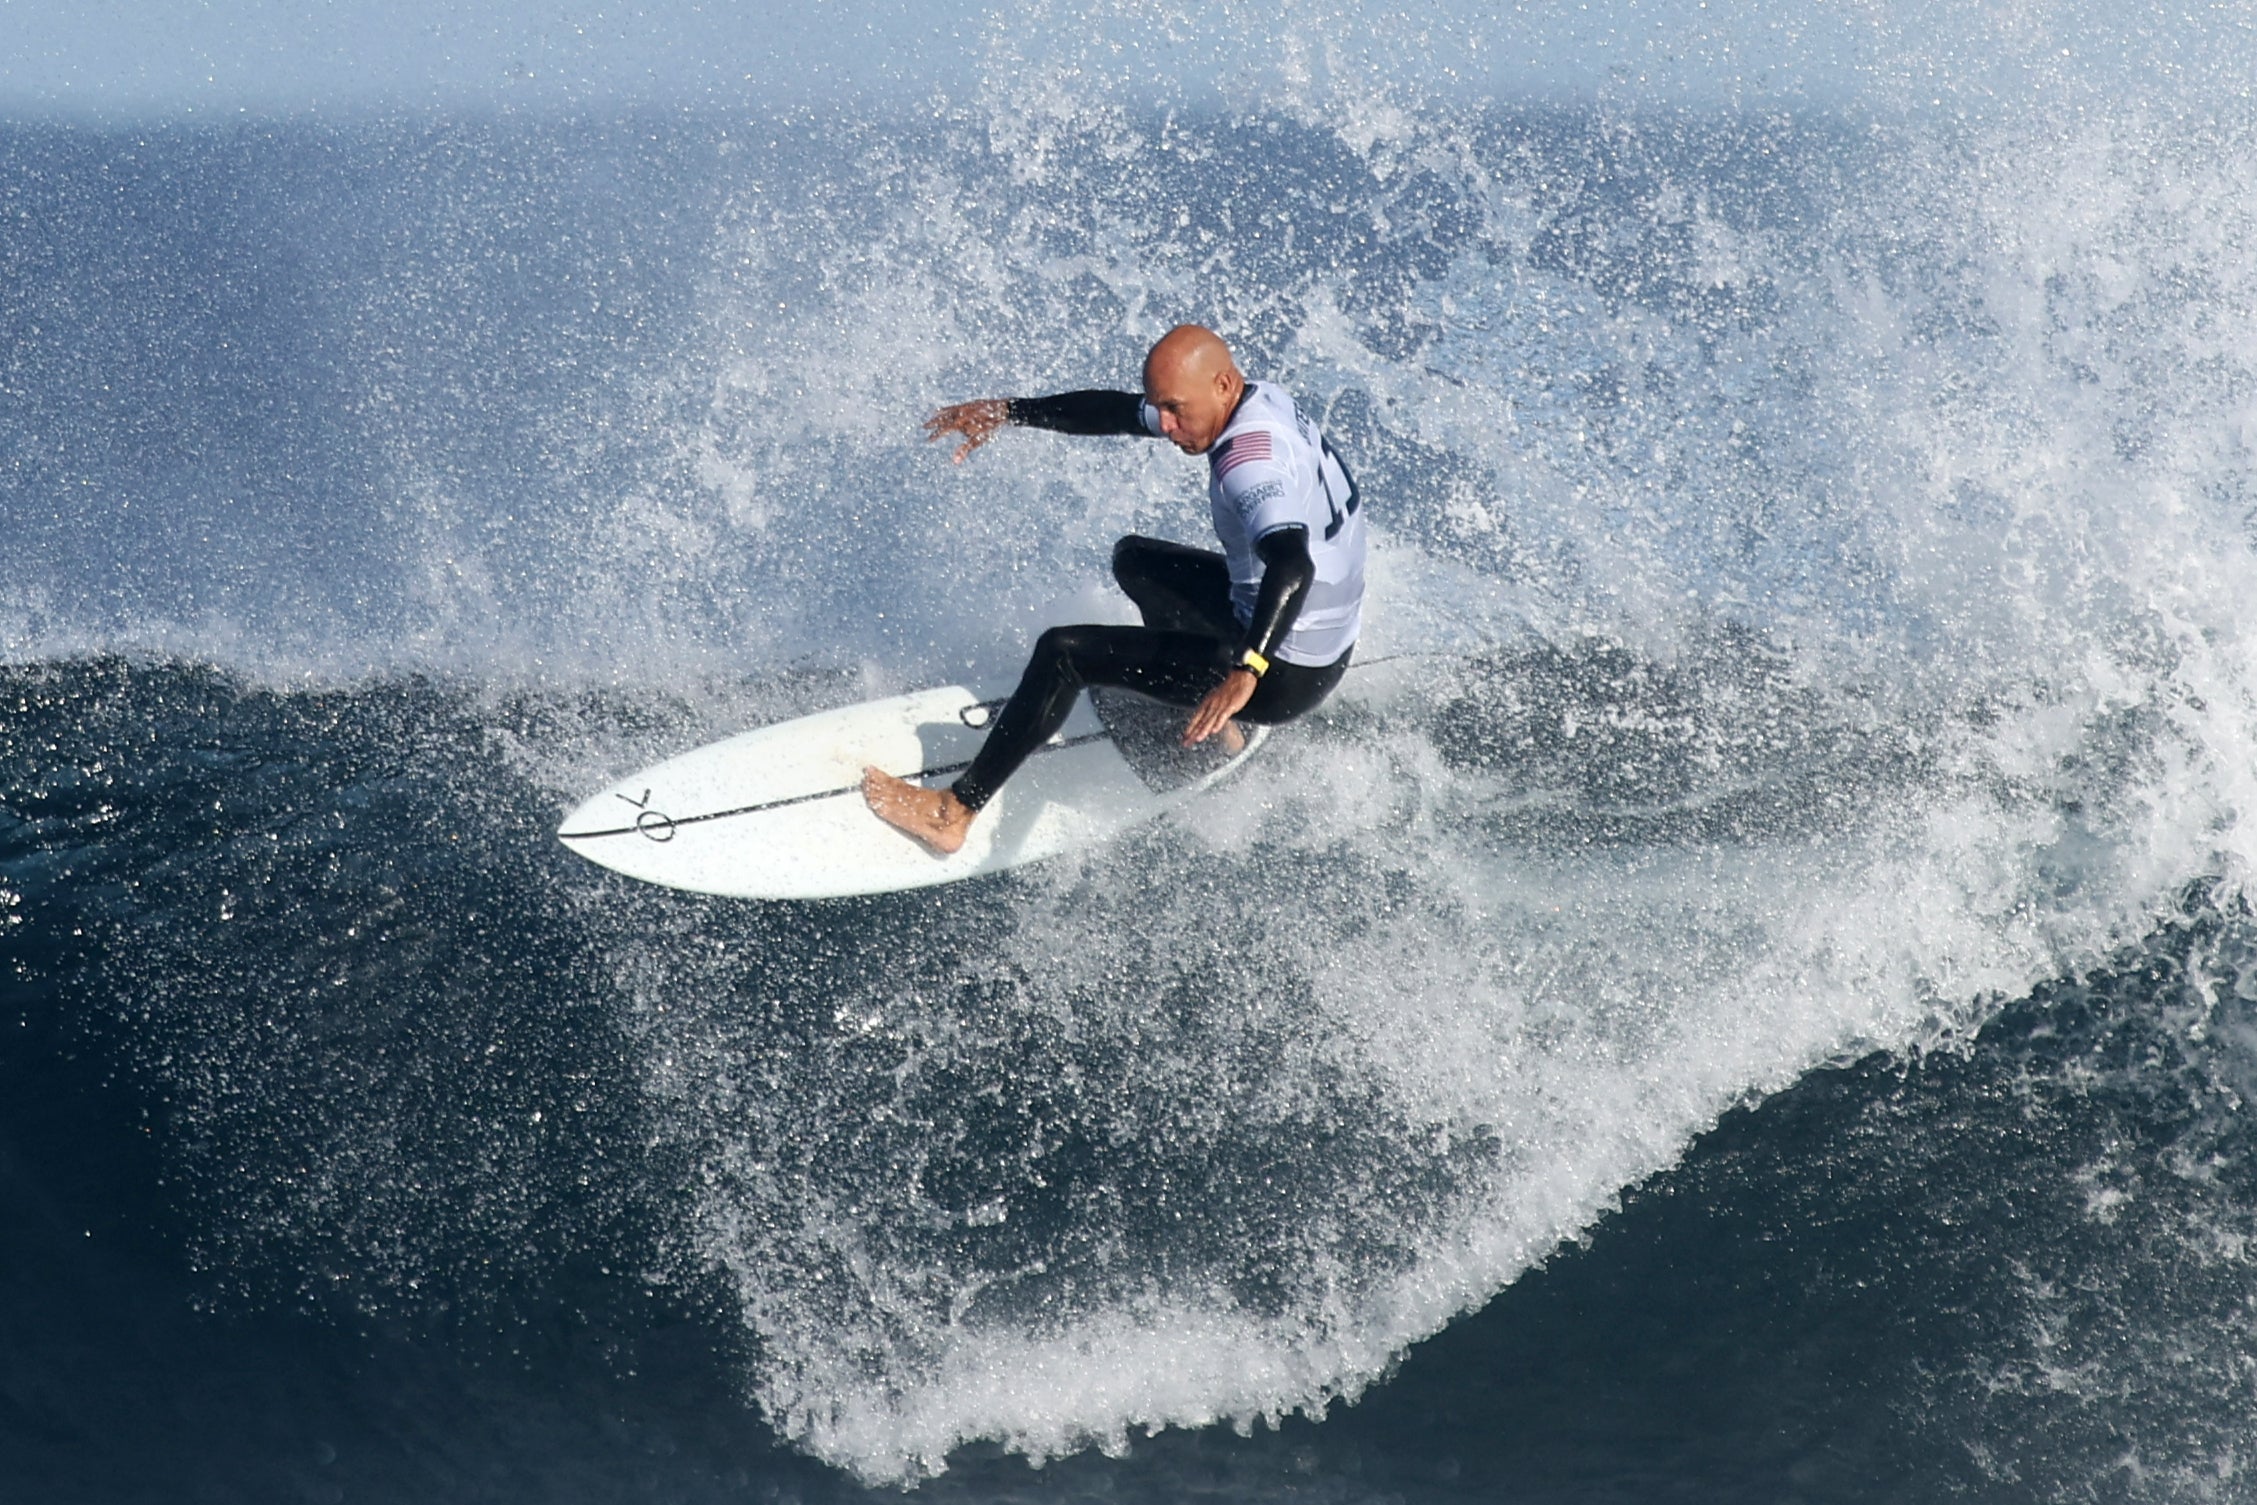 Kelly Slater is retiring from surfing as its greatest champion